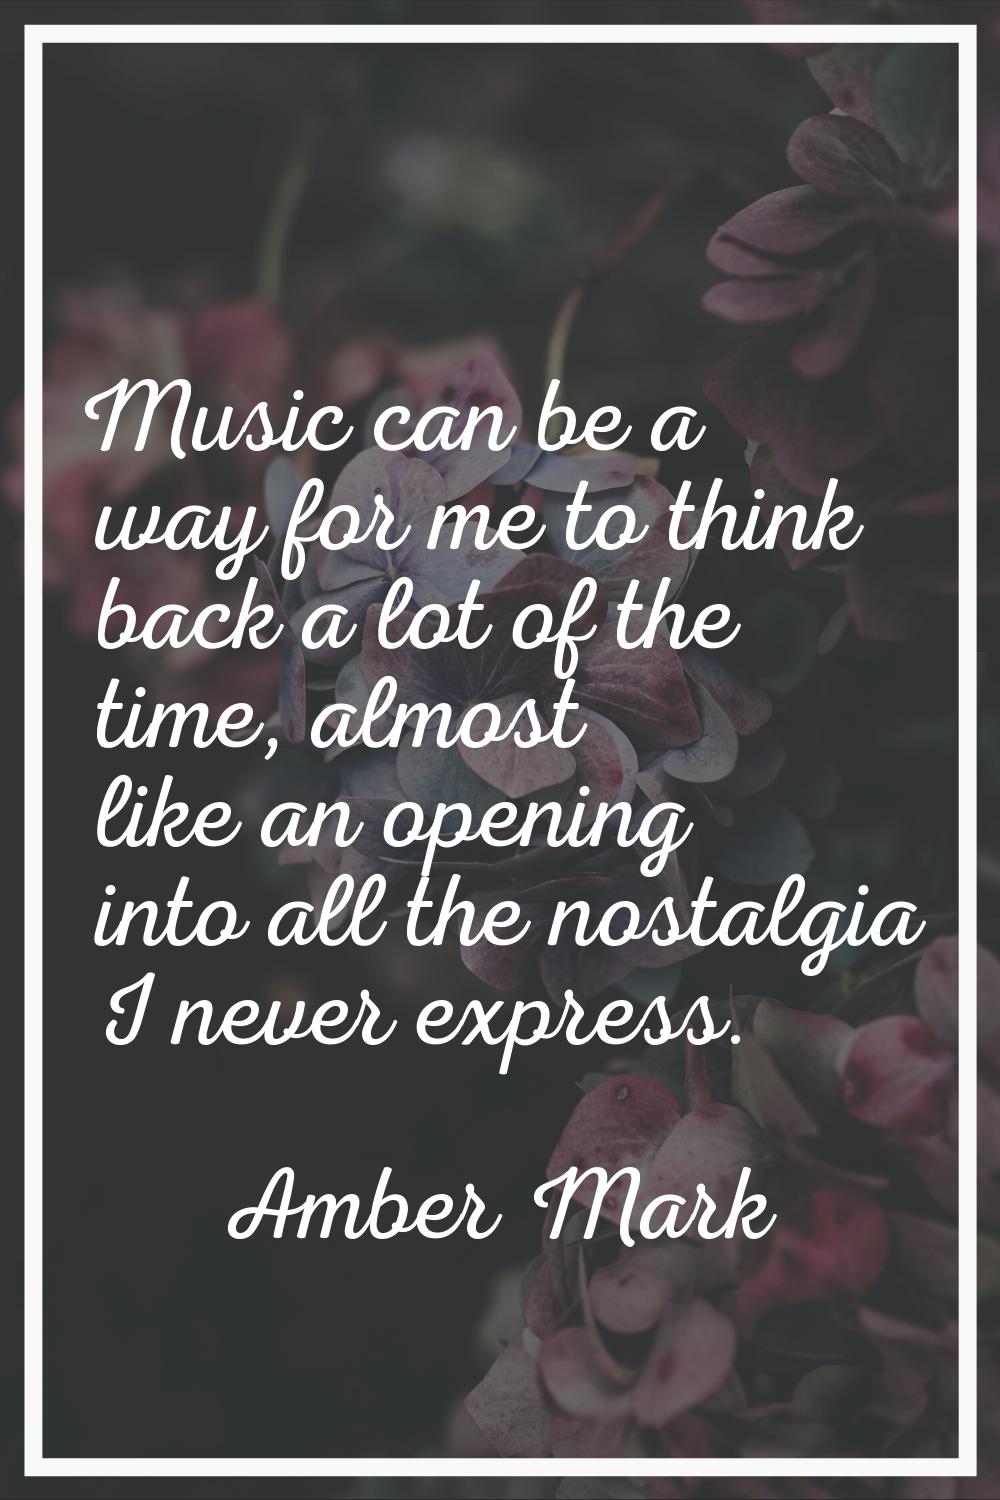 Music can be a way for me to think back a lot of the time, almost like an opening into all the nost